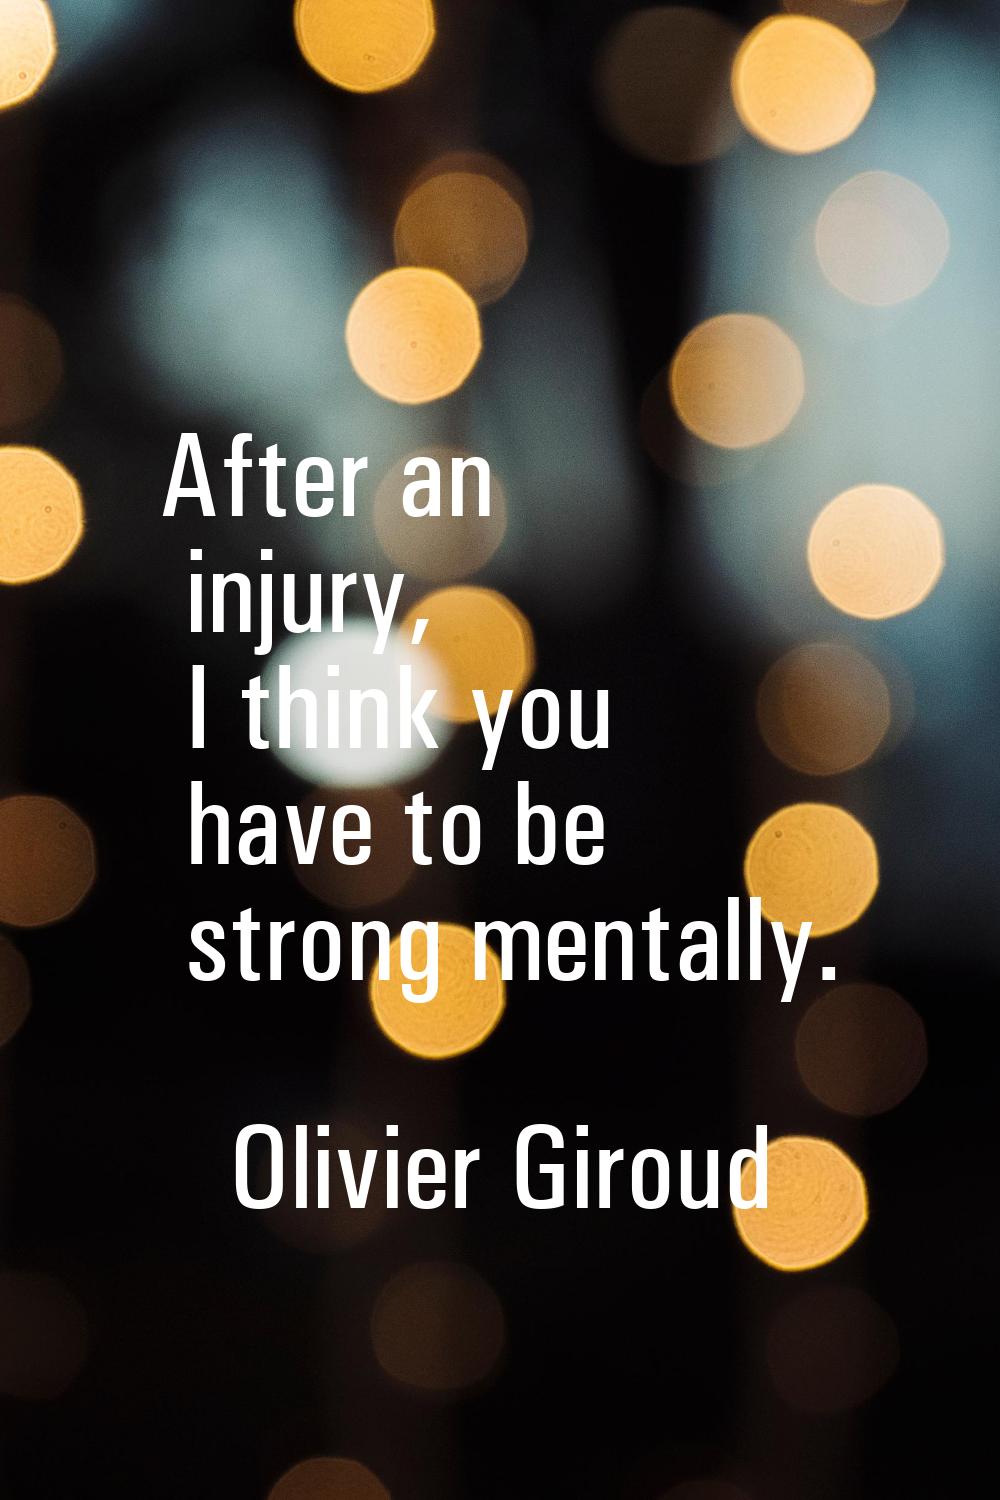 After an injury, I think you have to be strong mentally.